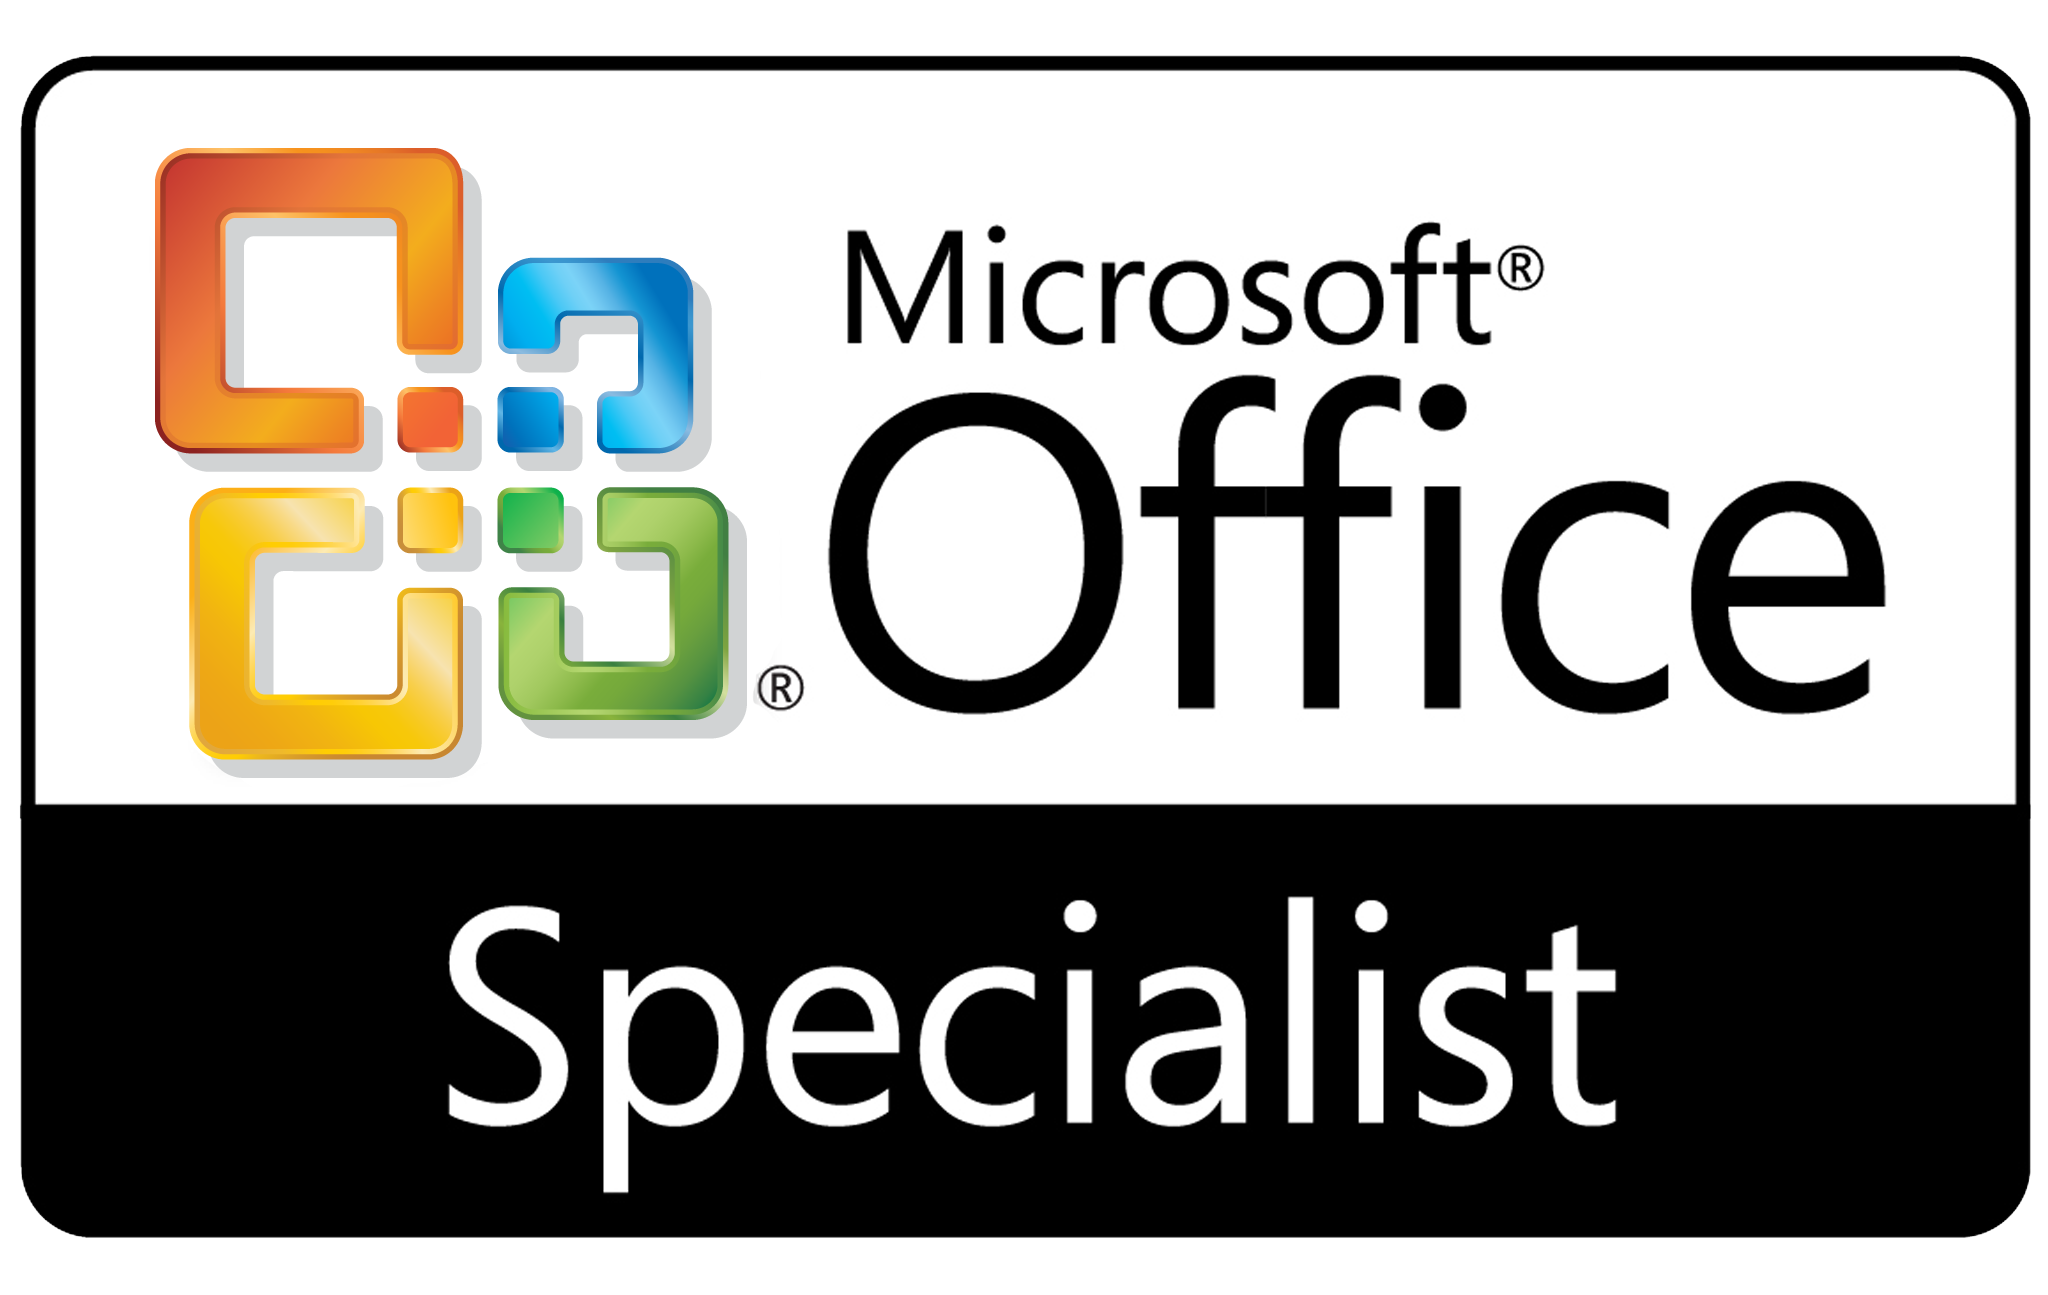 Microsoft Office specialist in company